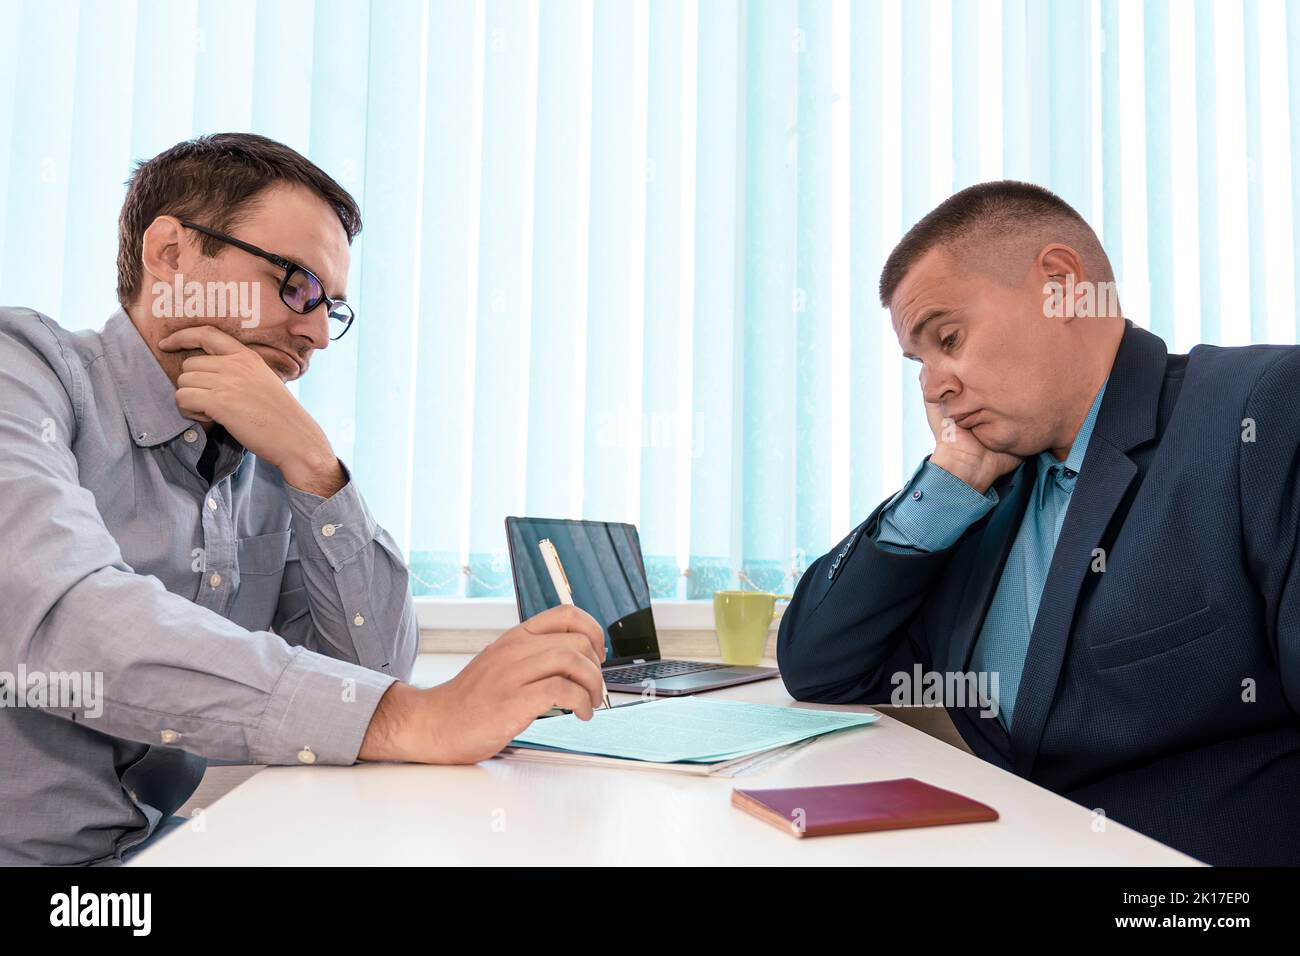 Focused young male ceo executive manager communicating with partner or client. Concentrated two businessmen sitting at table, involved in serious nego Stock Photo